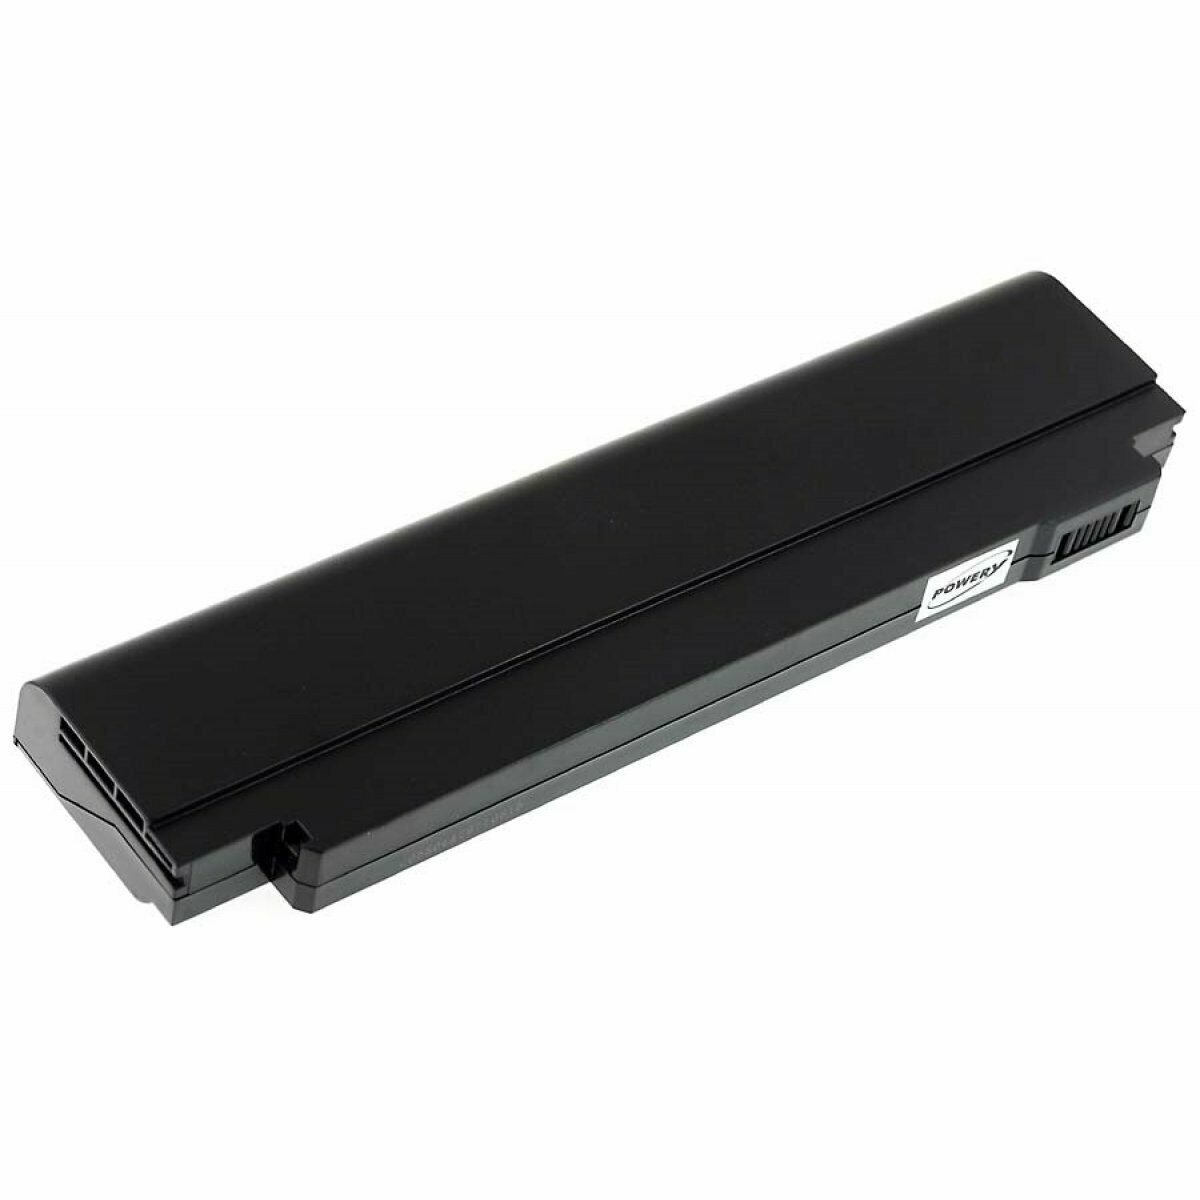 Medion Akoya E-3211 MD-97193 MD-97194 MD-97195 MD-97378 compatible battery